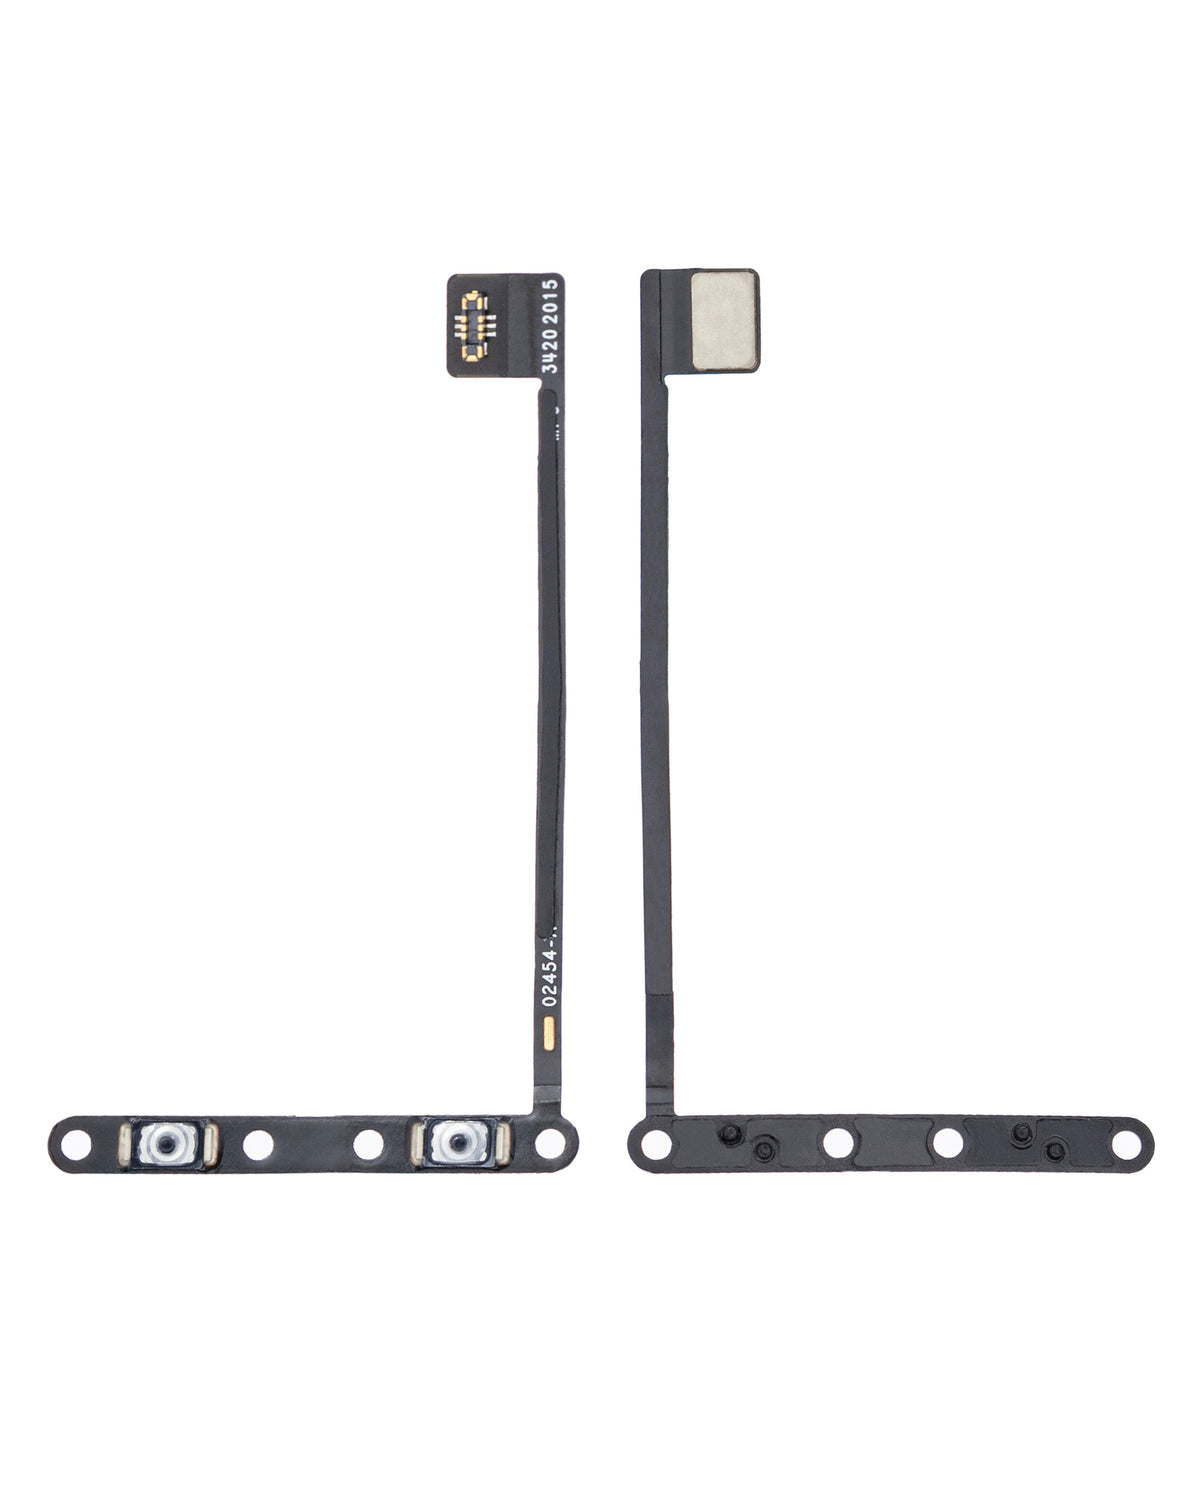 VOLOME BUTTON FLEX CABLE (WIFI VERSION) FOR IPAD PRO 11(2ND)/12.9(4TH)